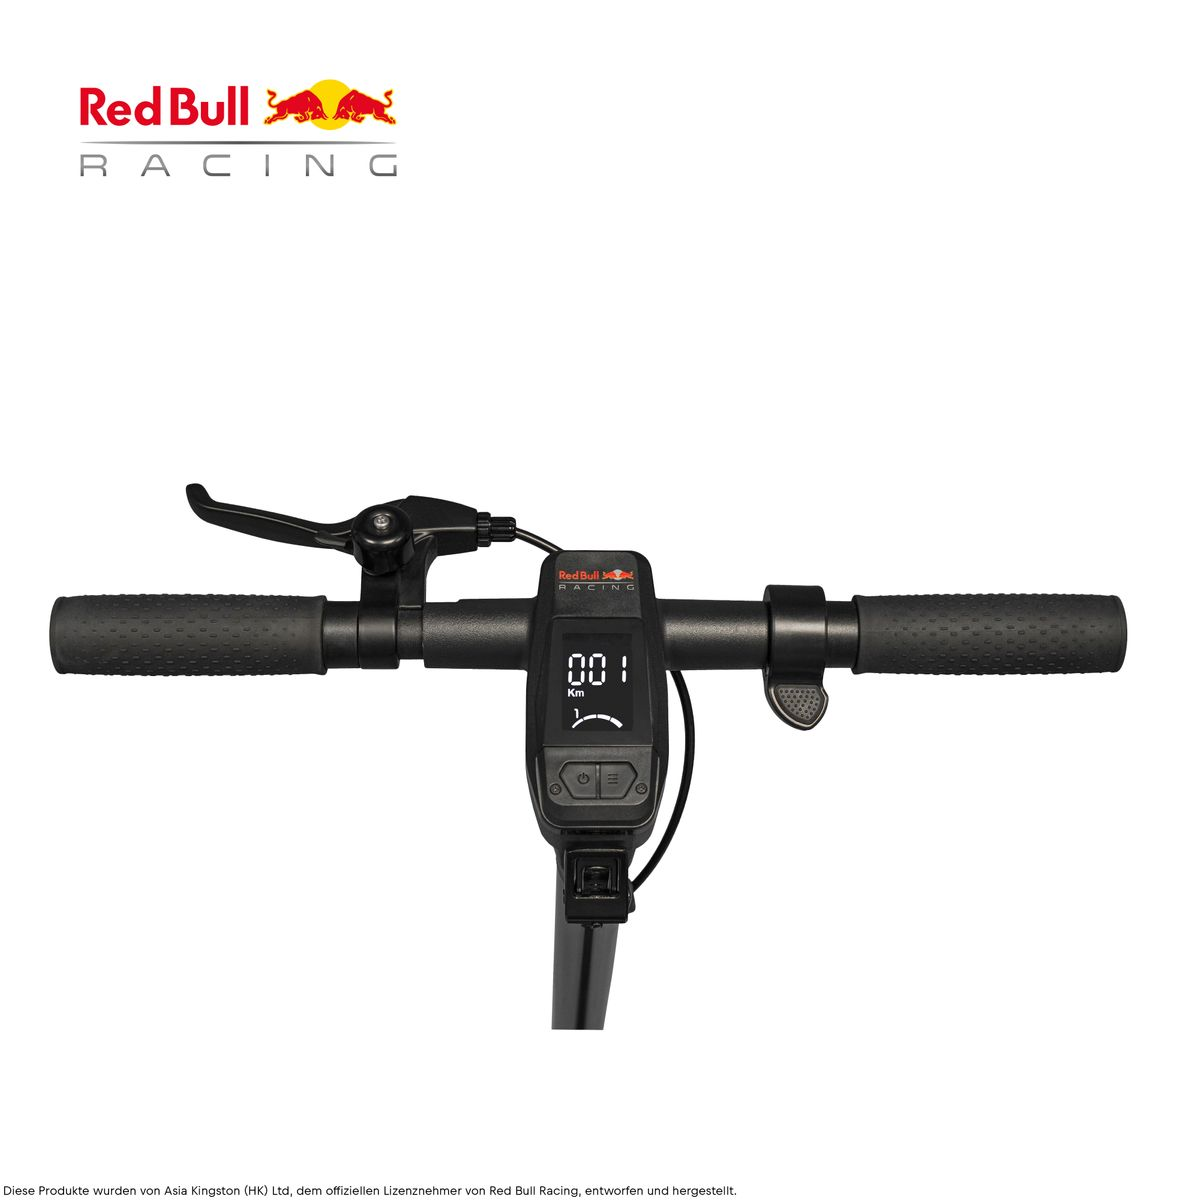 RED BULL Racing E-Scooter Blau-Rot) Zoll, (10 1000 RS